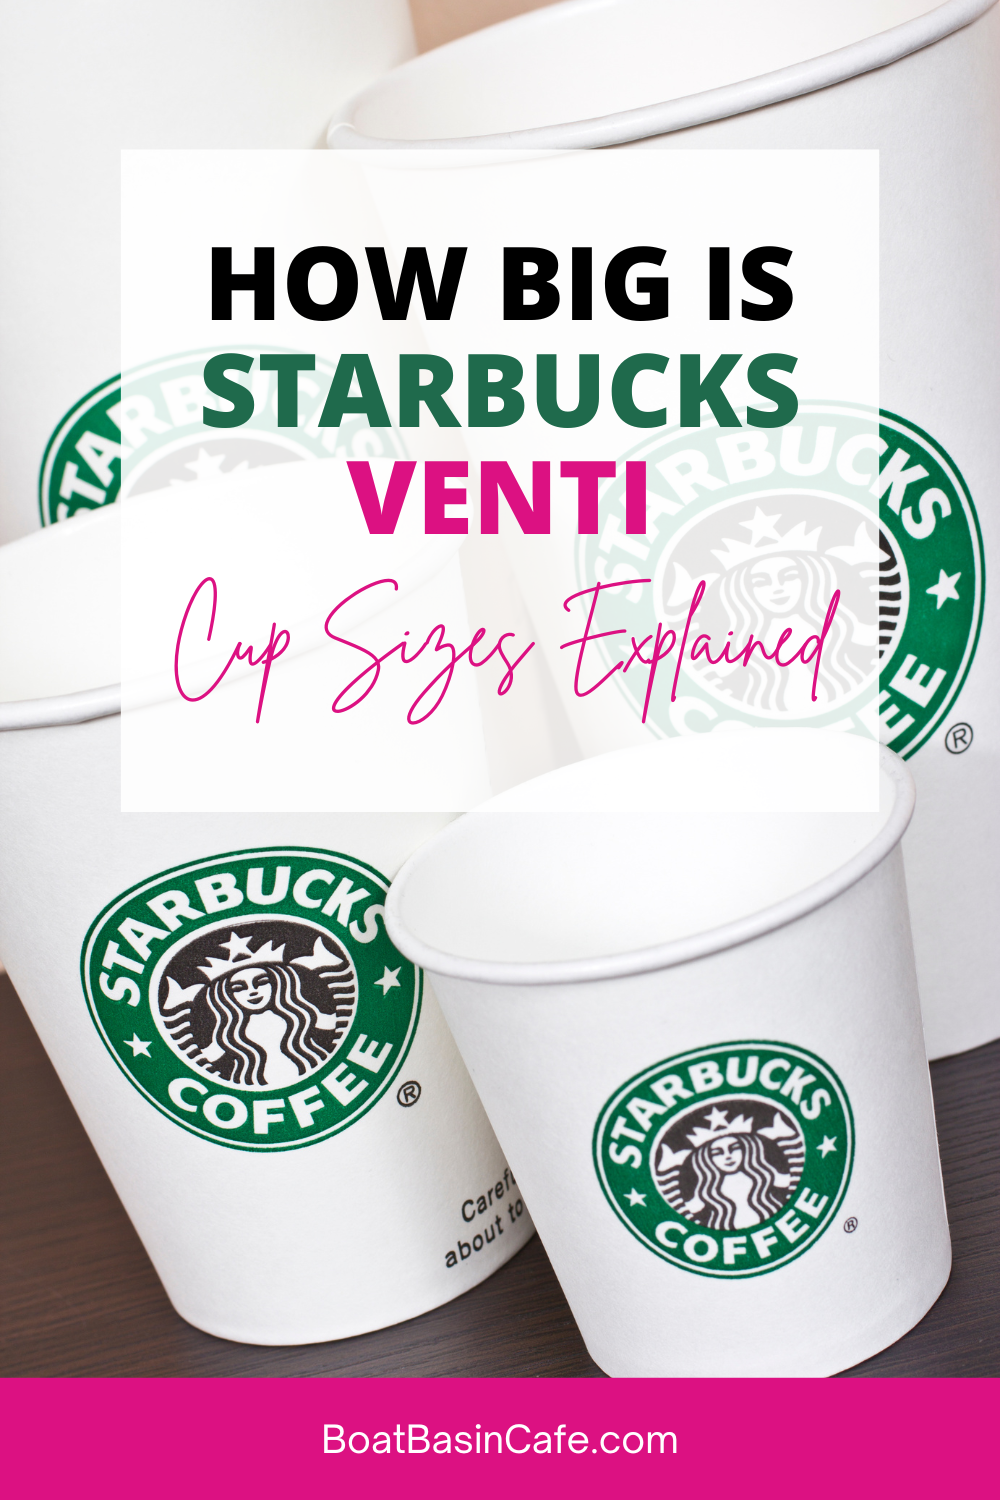 How Big is Starbucks Venti: Starbucks Cup Sizes Explained